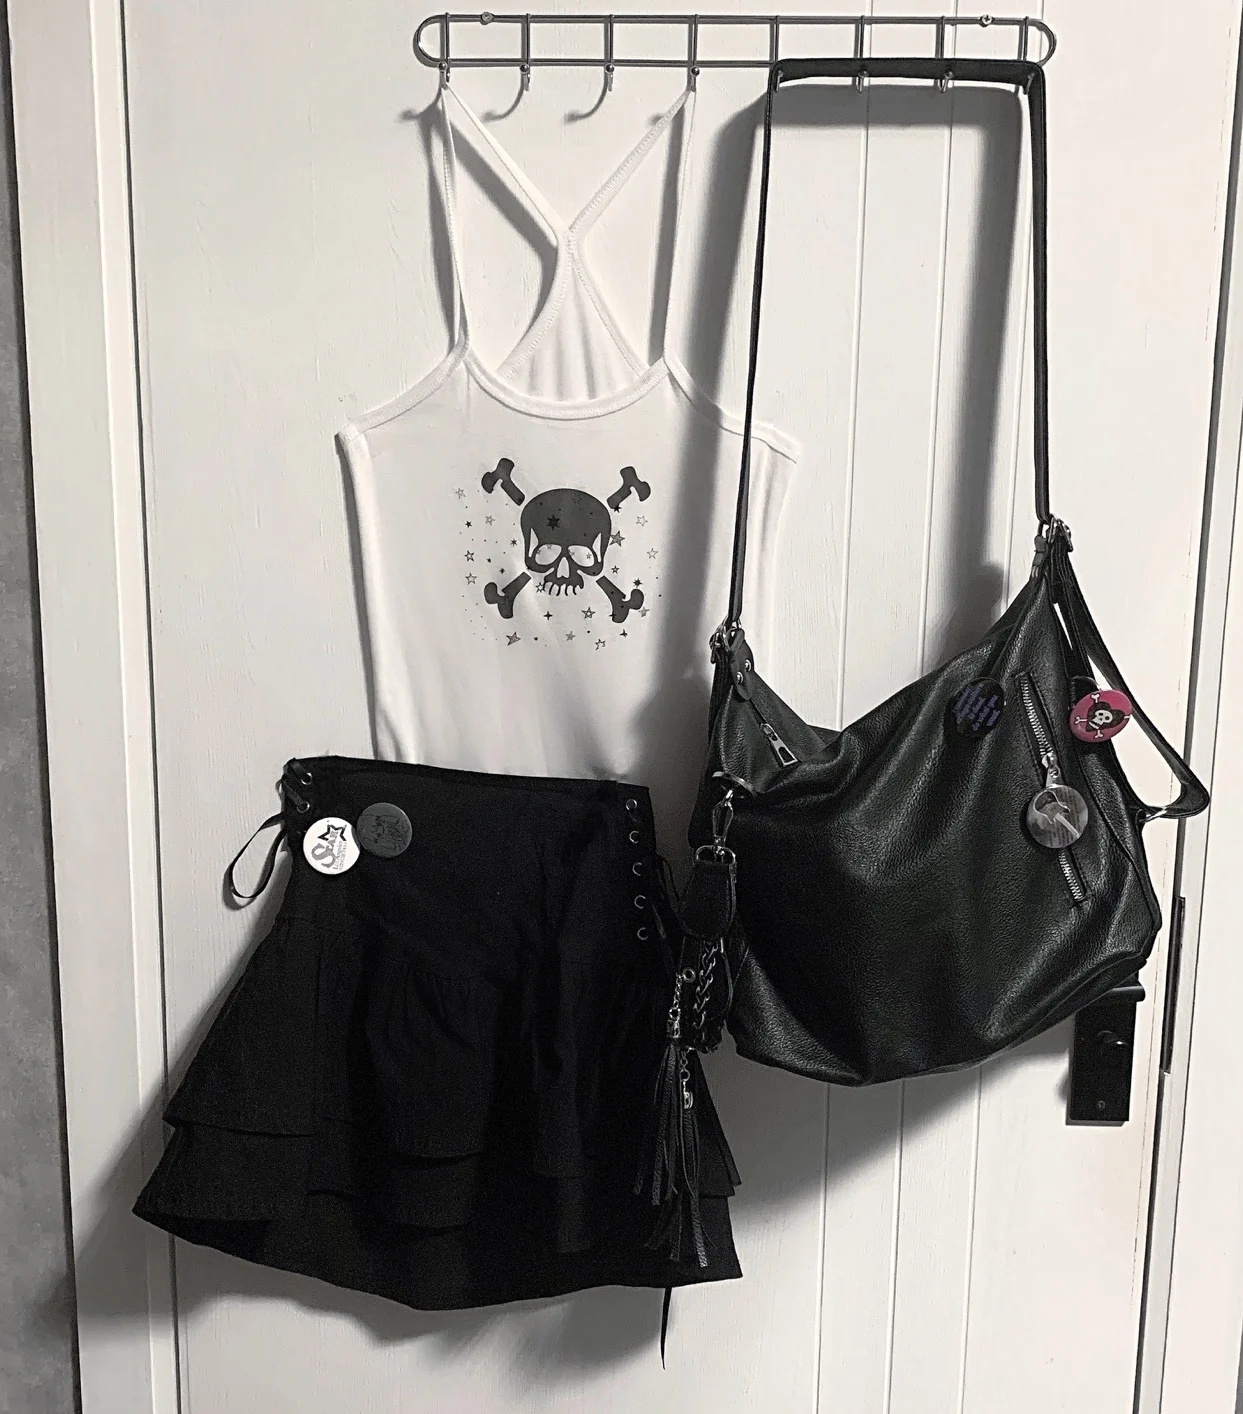 Ruibbit New Arrival White Women Bunny Vest Sleeveless Summer Sexy Crop Tops T-shirt Girls Party Casual Tees Y2k Tops